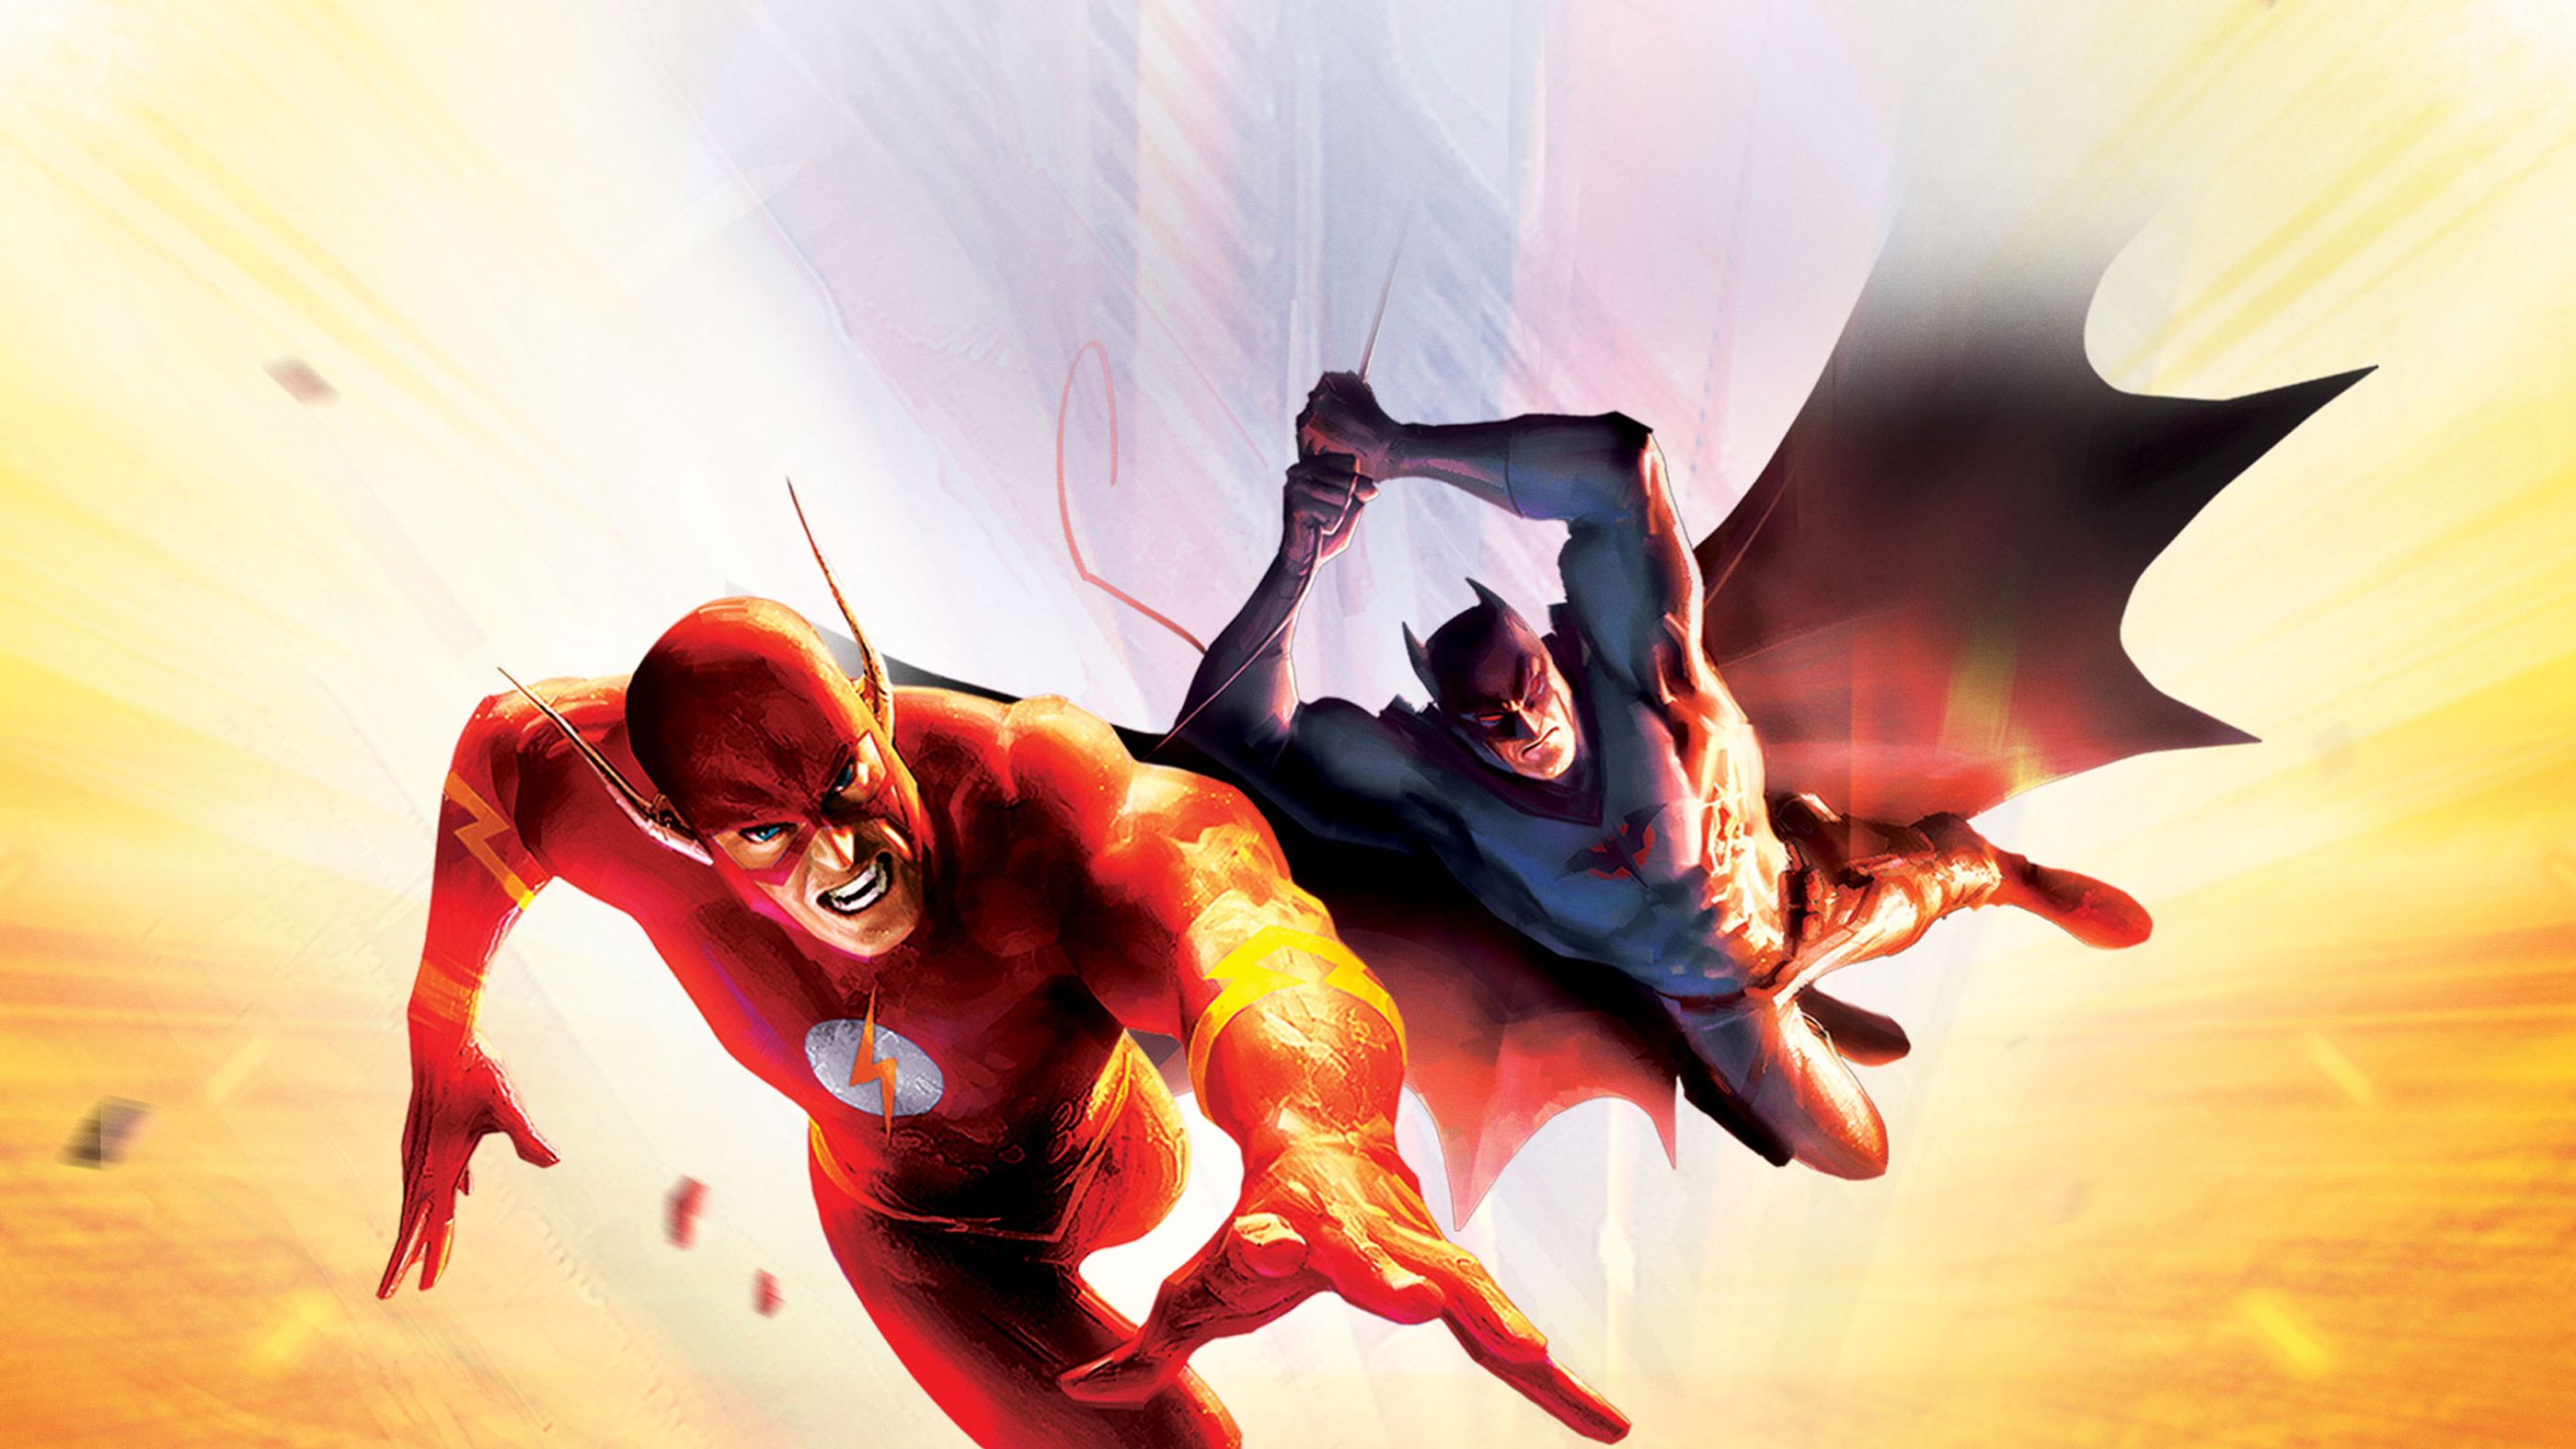 Justice League: The Flashpoint Paradox | Movies Anywhere